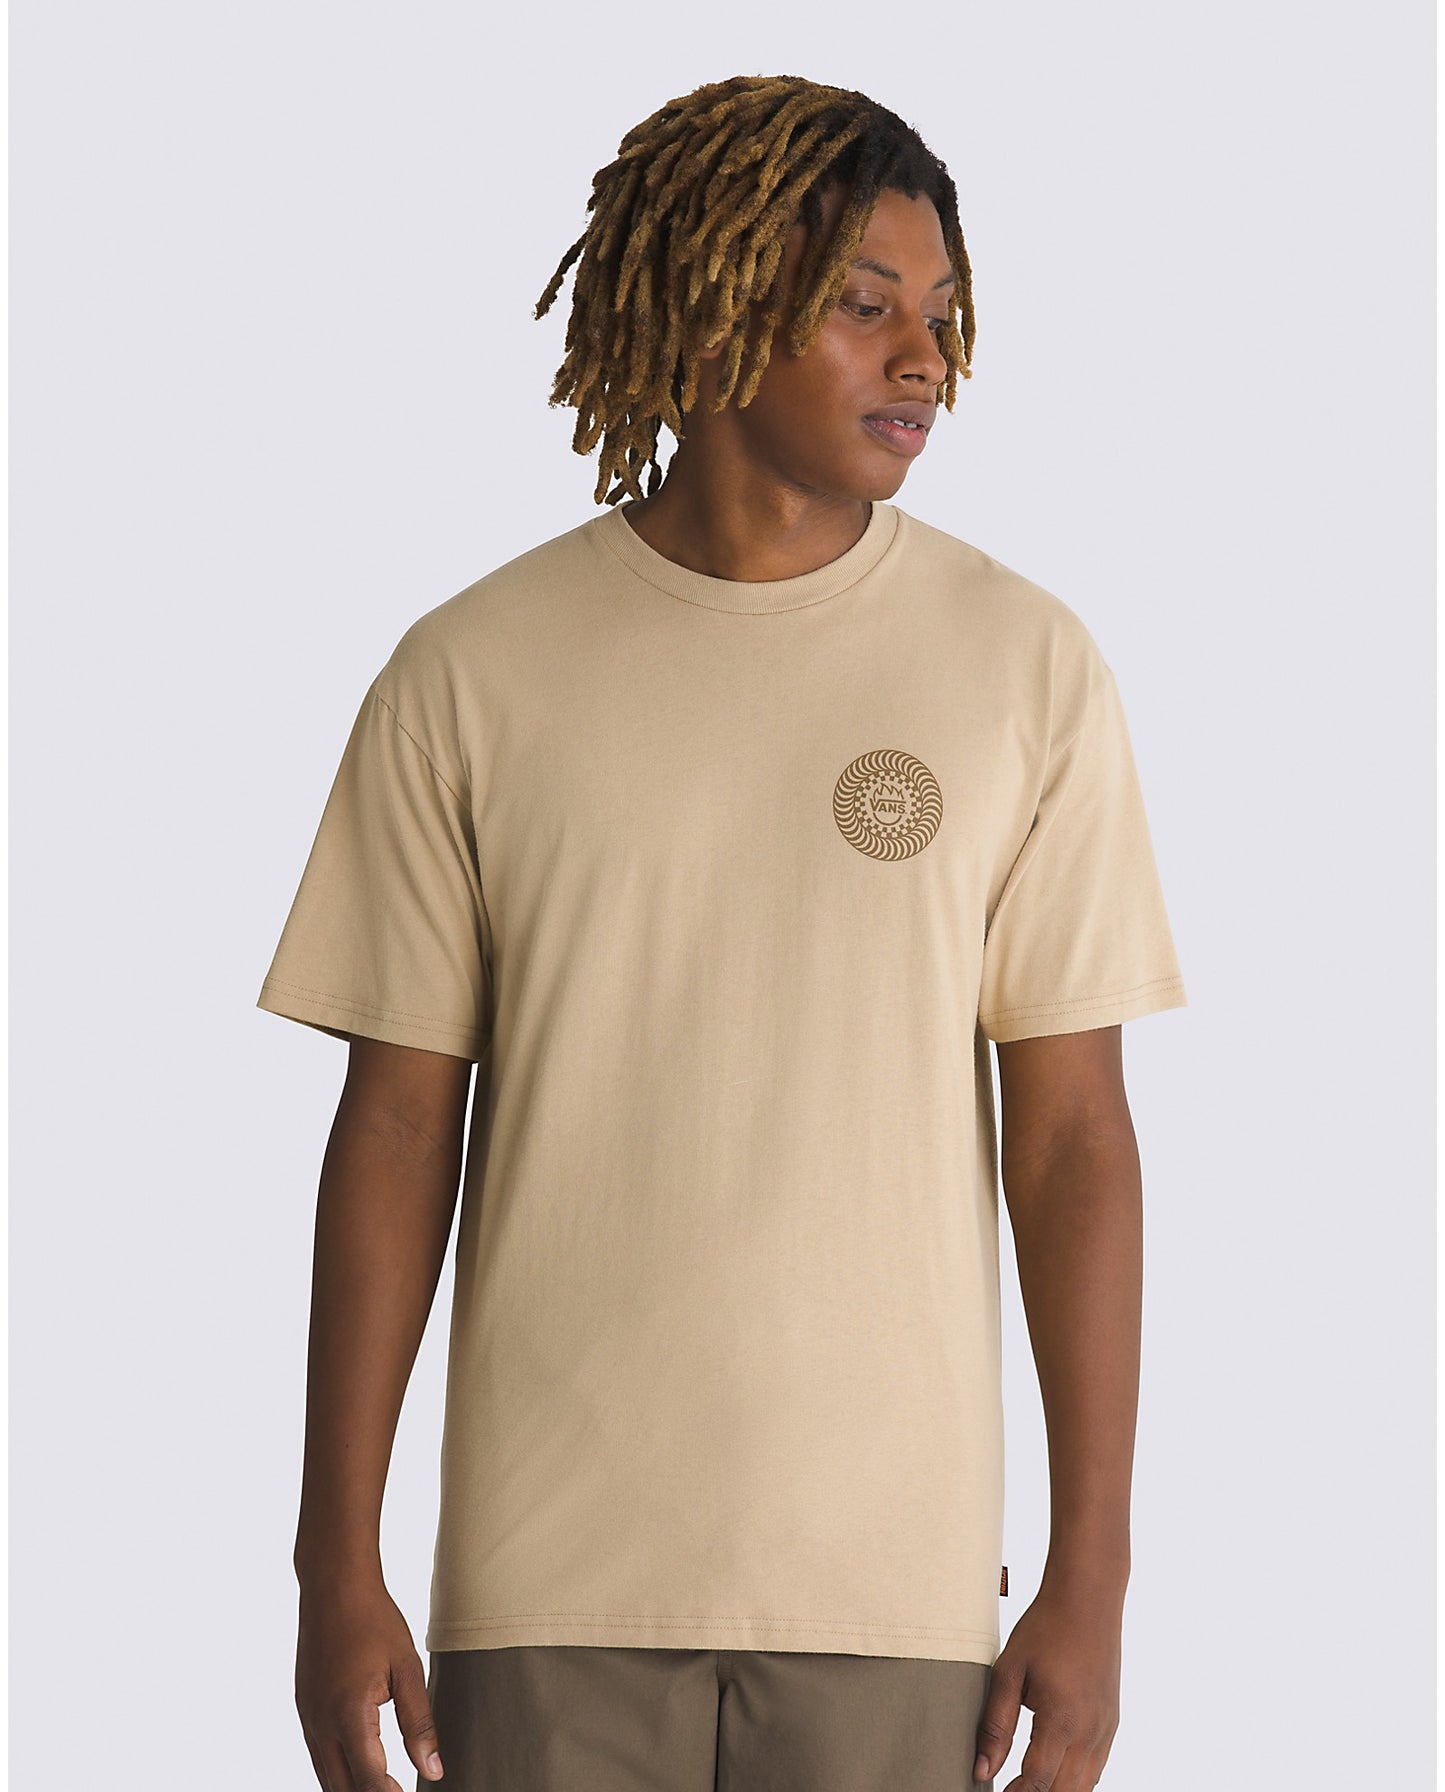 Vans X Spitfire Wheels S/S Tee Shirt Incense(size options listed)